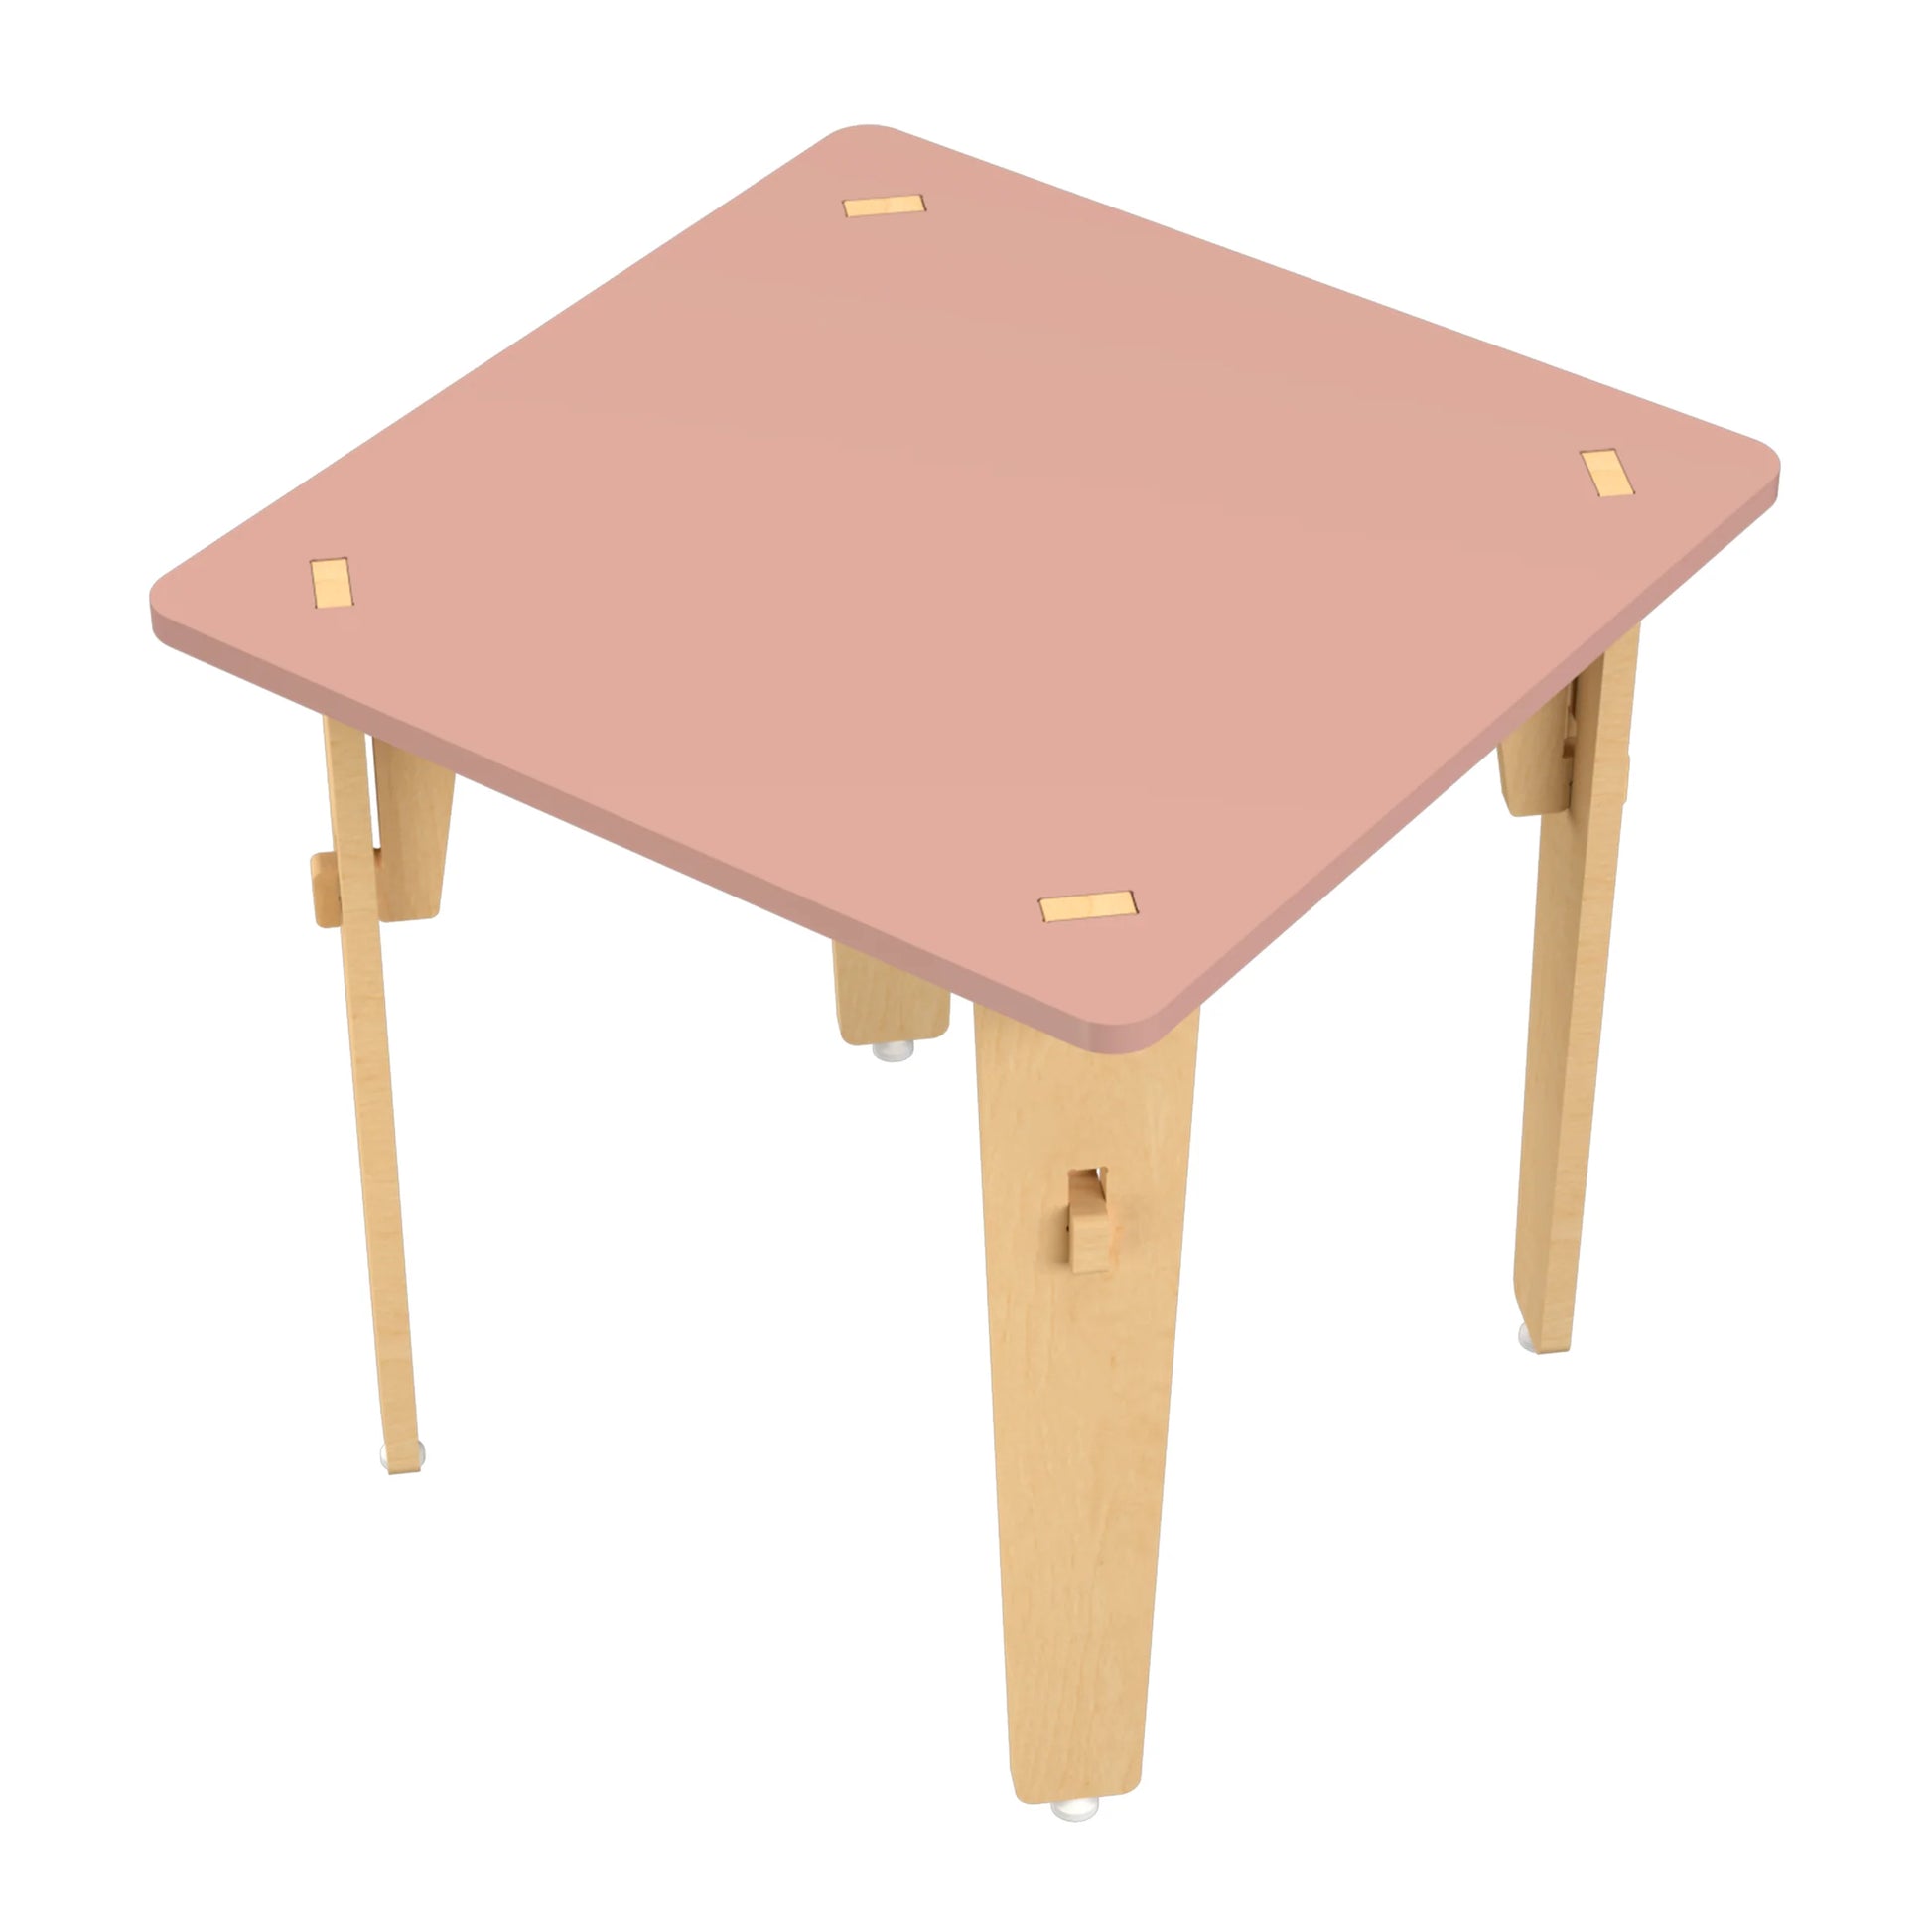 Buy Lime Fig Wooden Table - Pink (21 Inches) - Upper View - SkilloToys.com